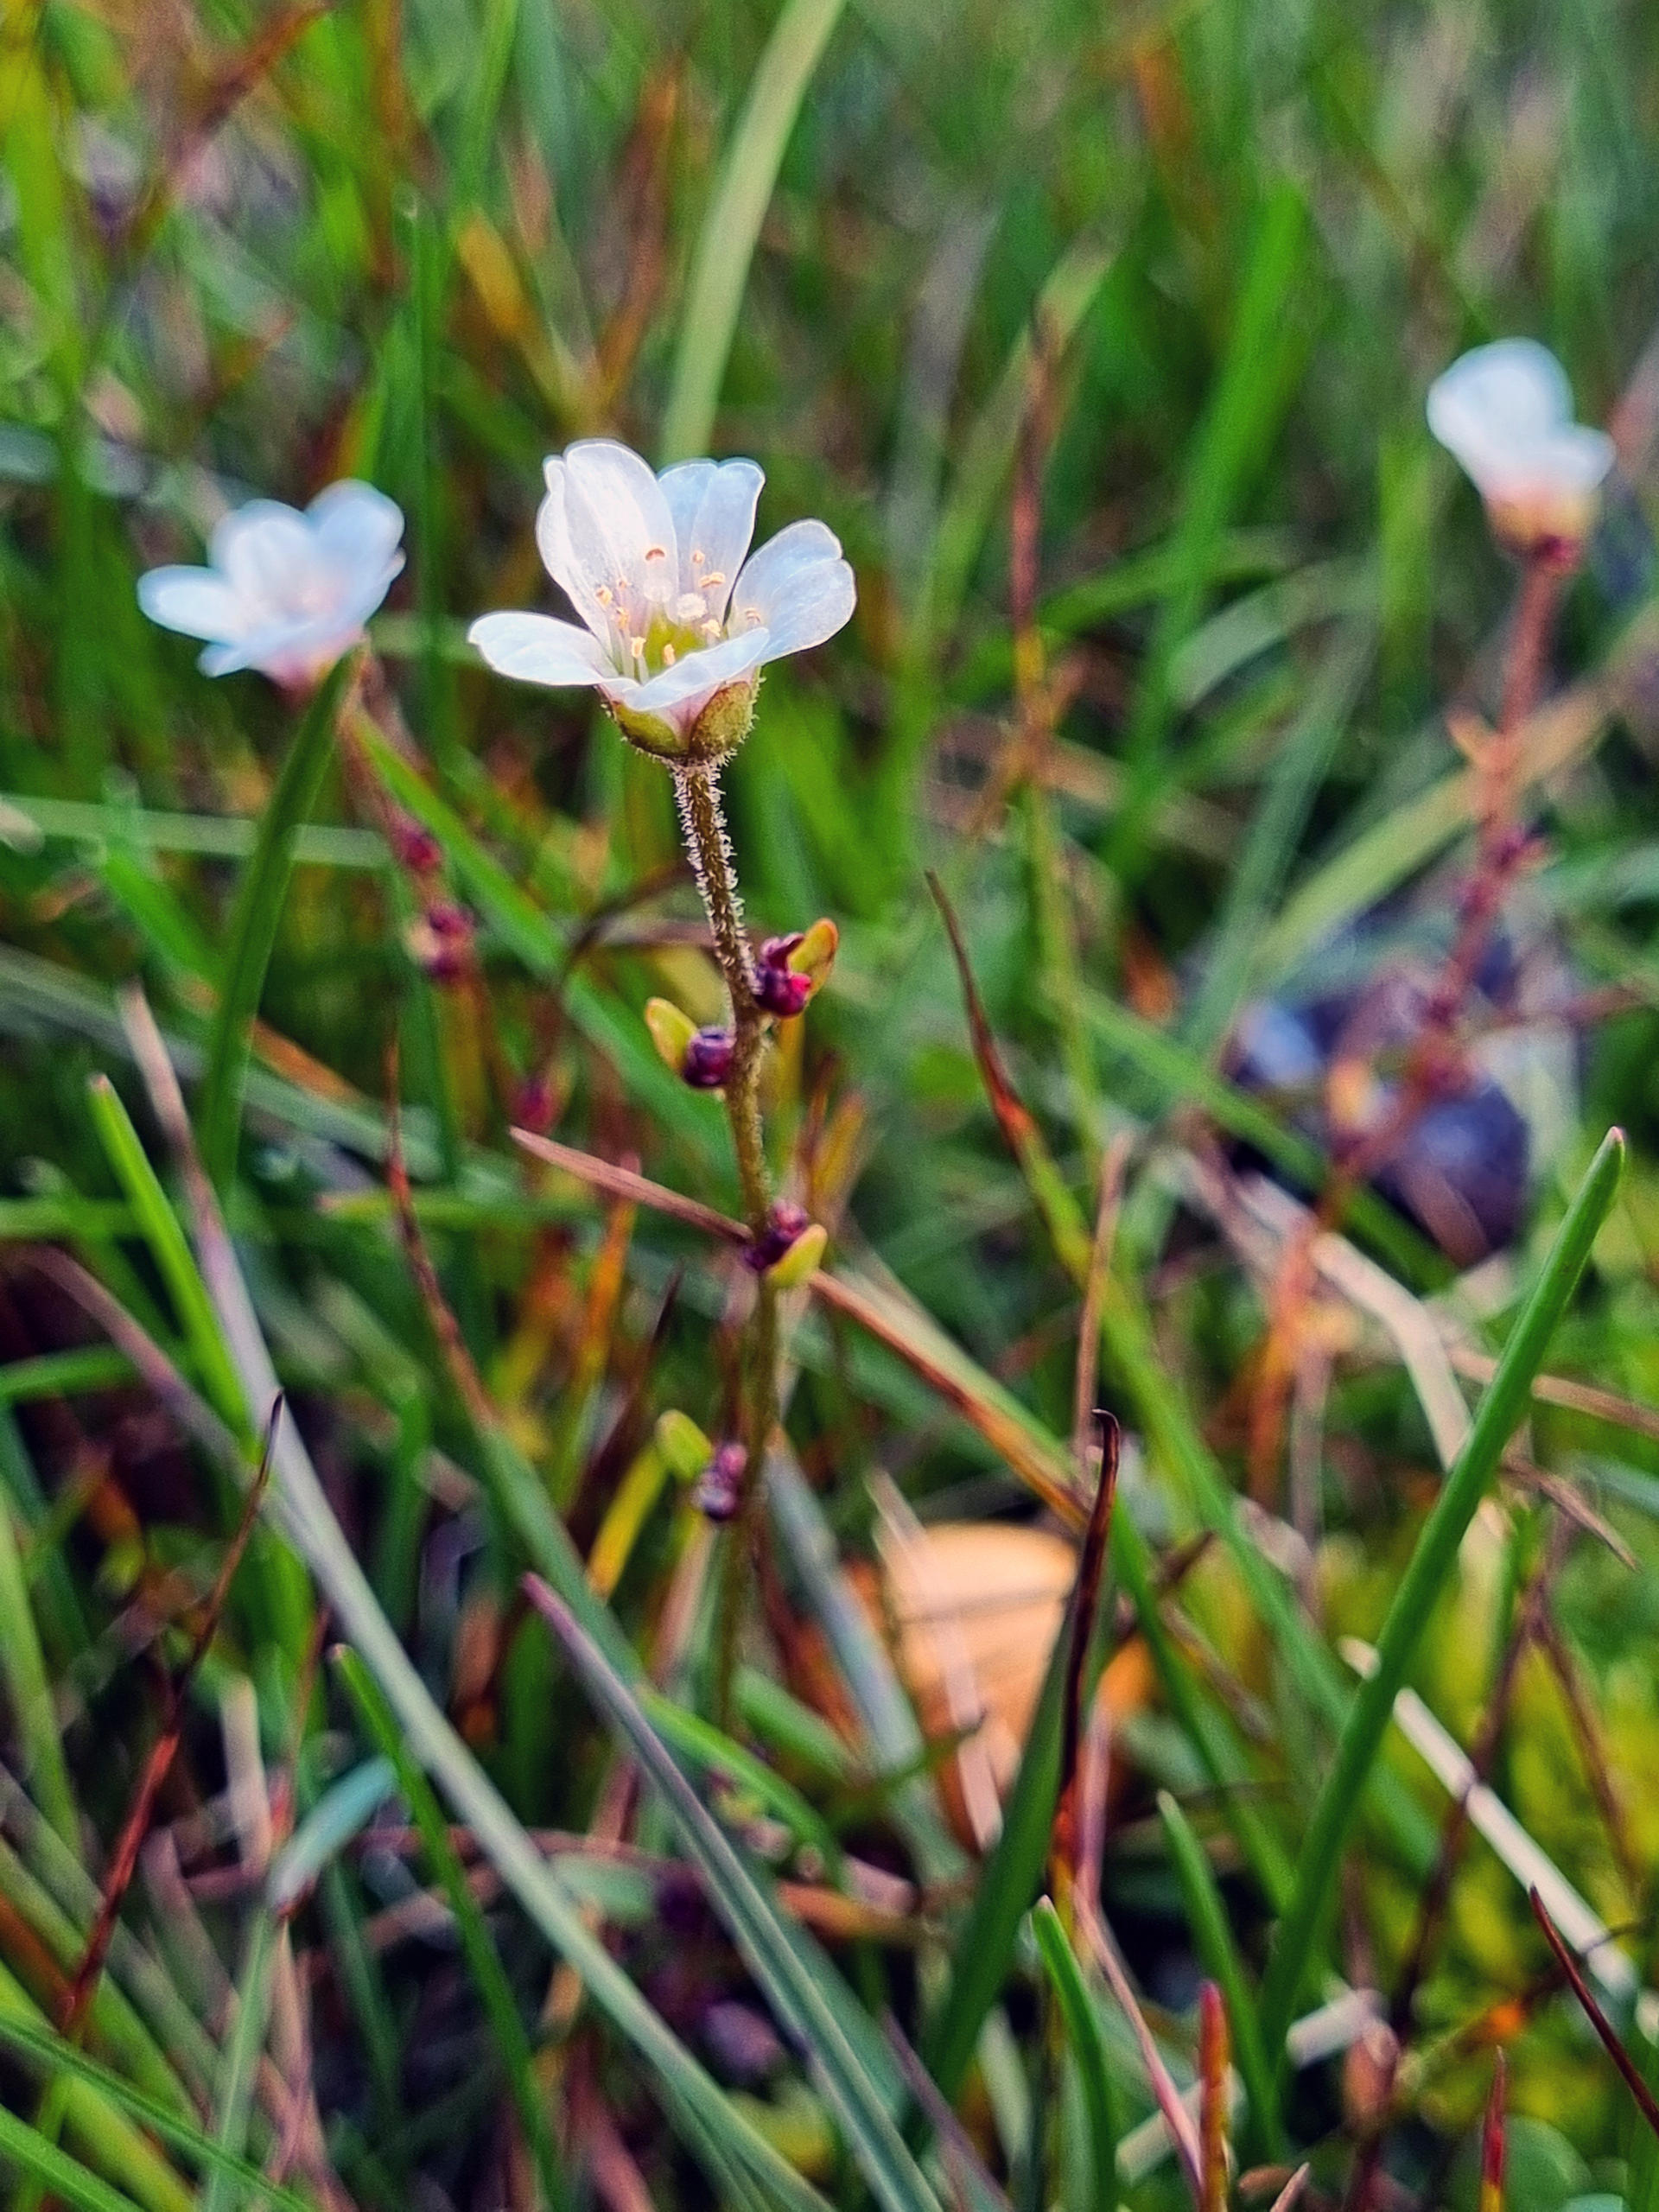 Endemic Saxifraga svalbardensis - a plant with white blossoms